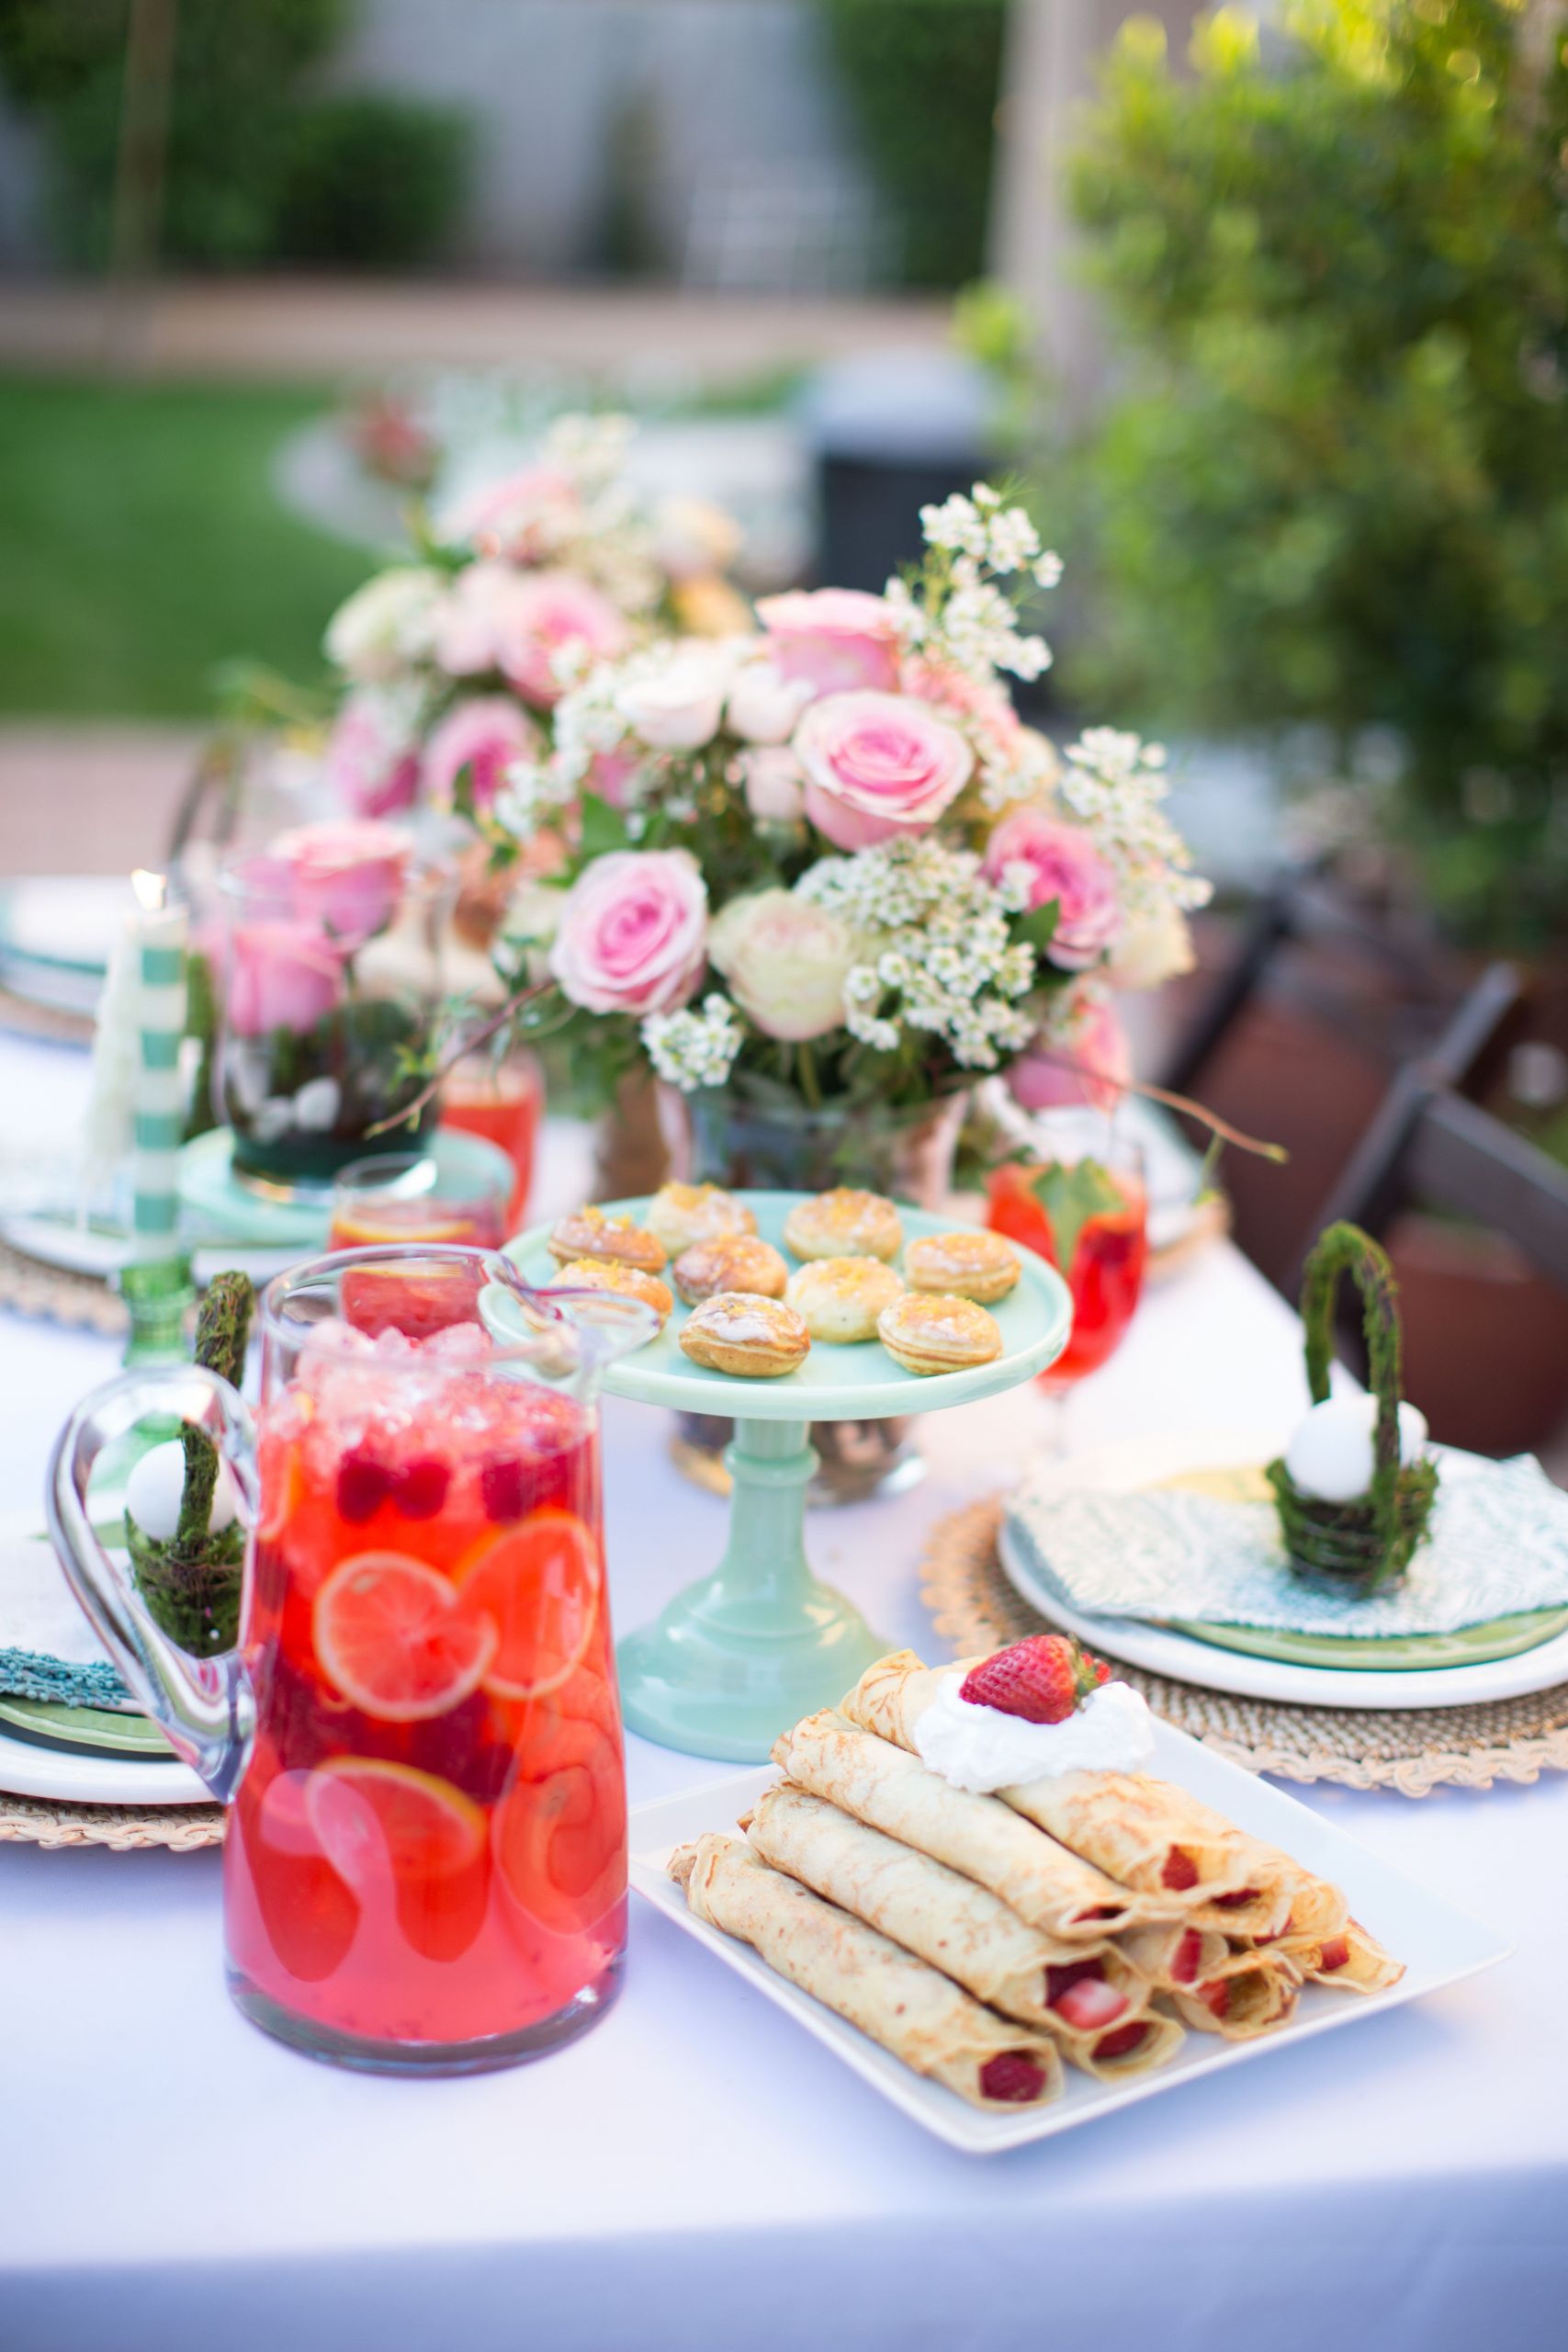 Easter Brunch Party Ideas
 An Easter Brunch with World Market